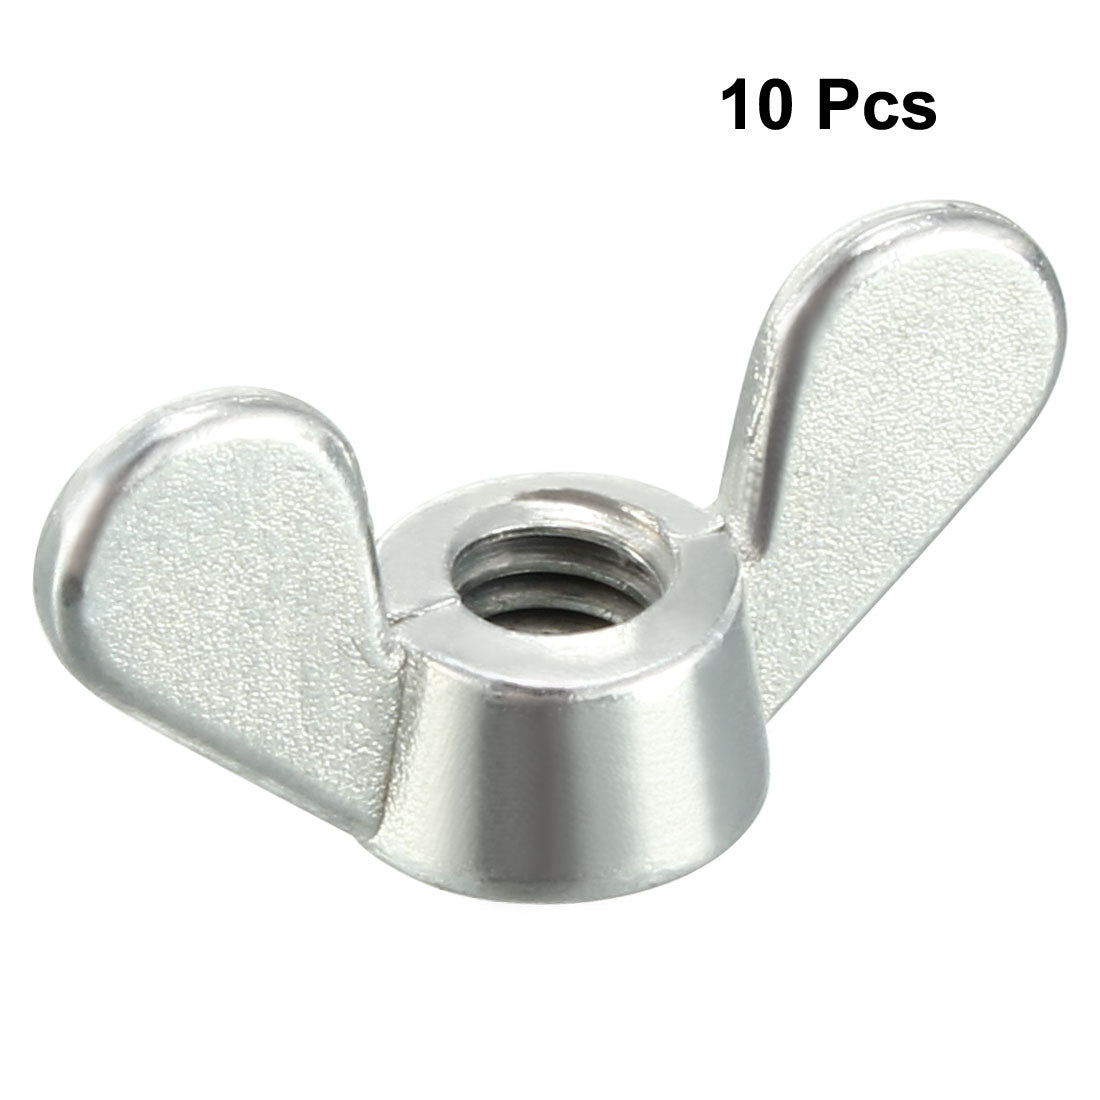 uxcell Uxcell M4 Wing Nuts Zinc Plated Fasteners Parts Butterfly Nut Silver Tone 10pcs